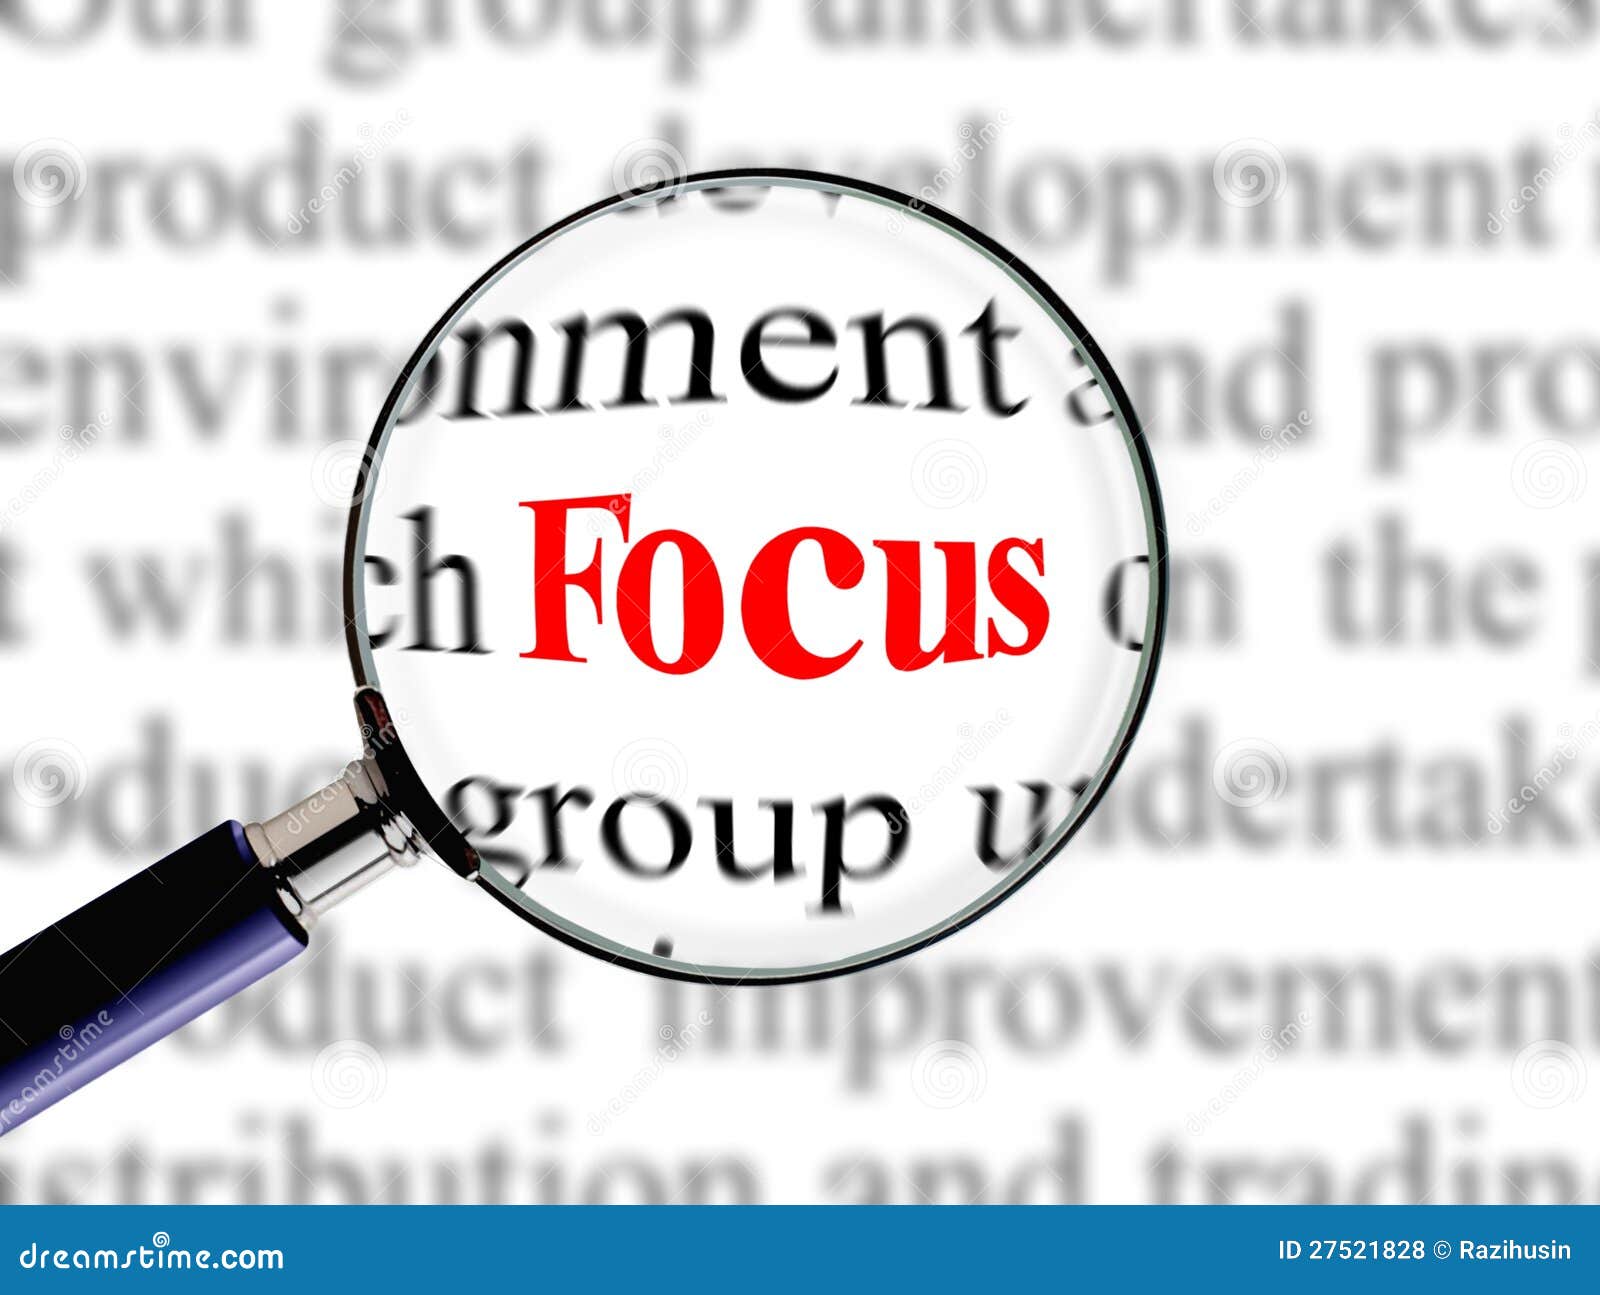 Magnifying on word focus stock illustration. Illustration of report